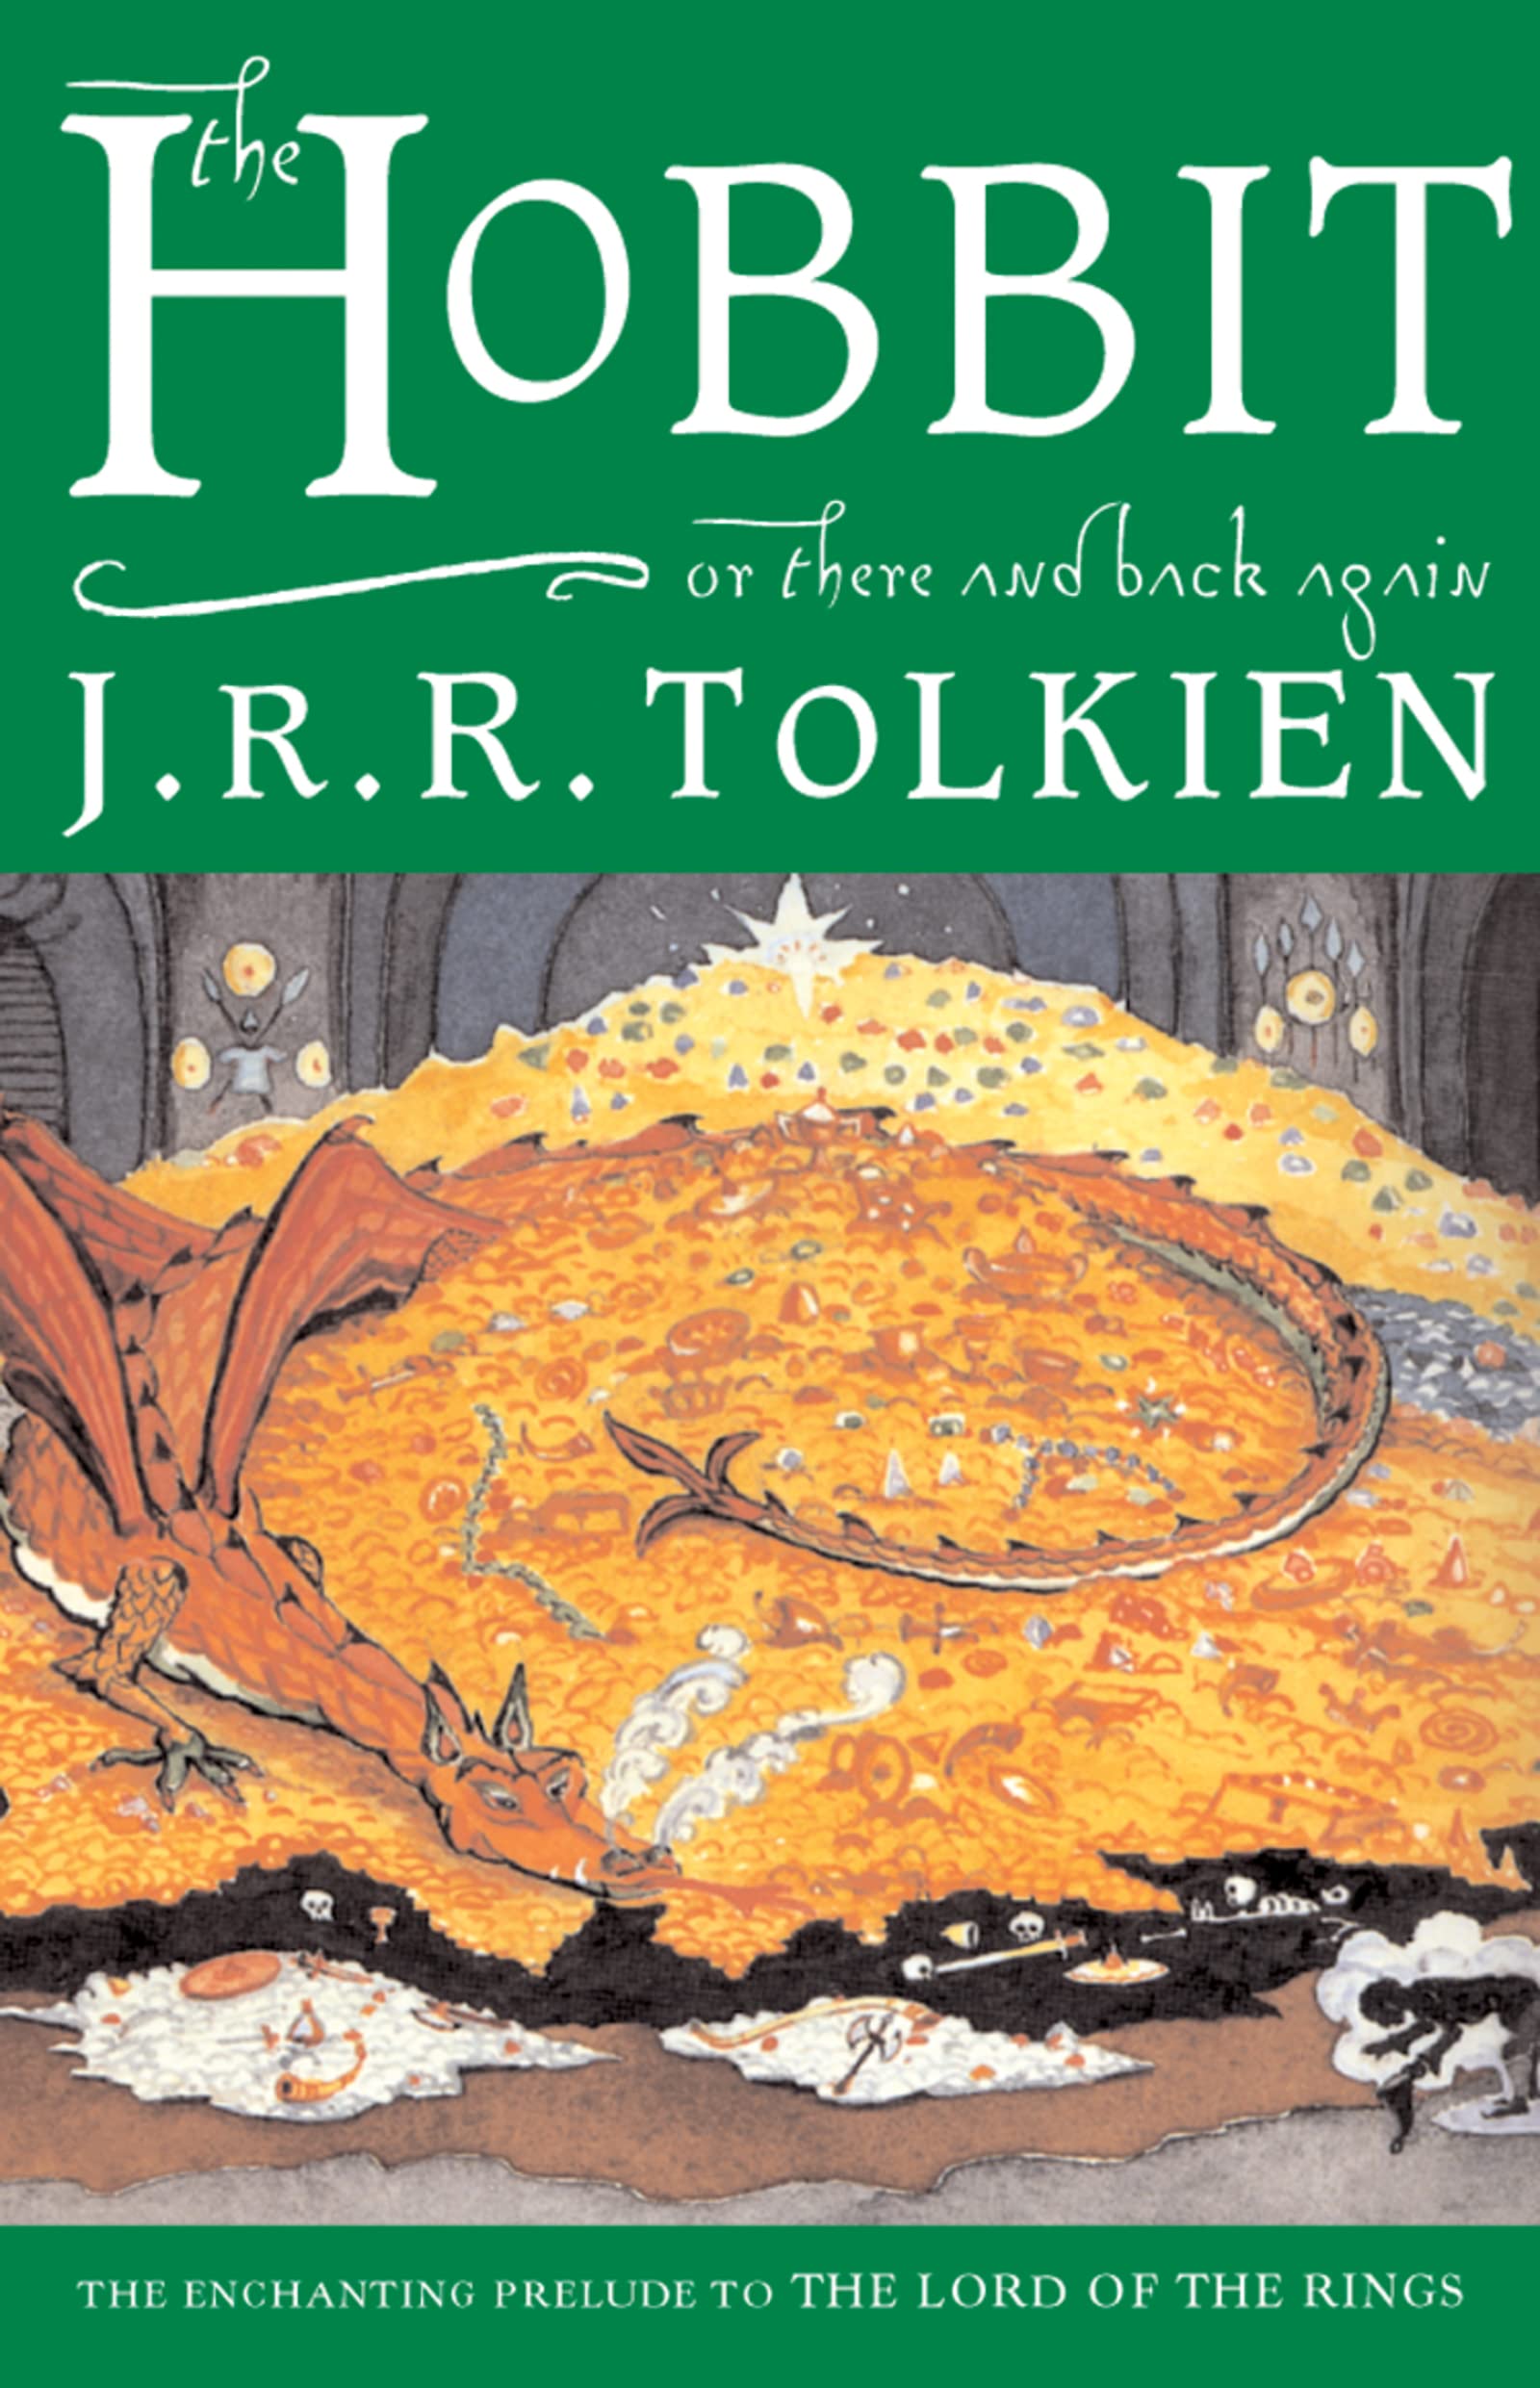 Book cover of The Hobbit by J R R Tolkien